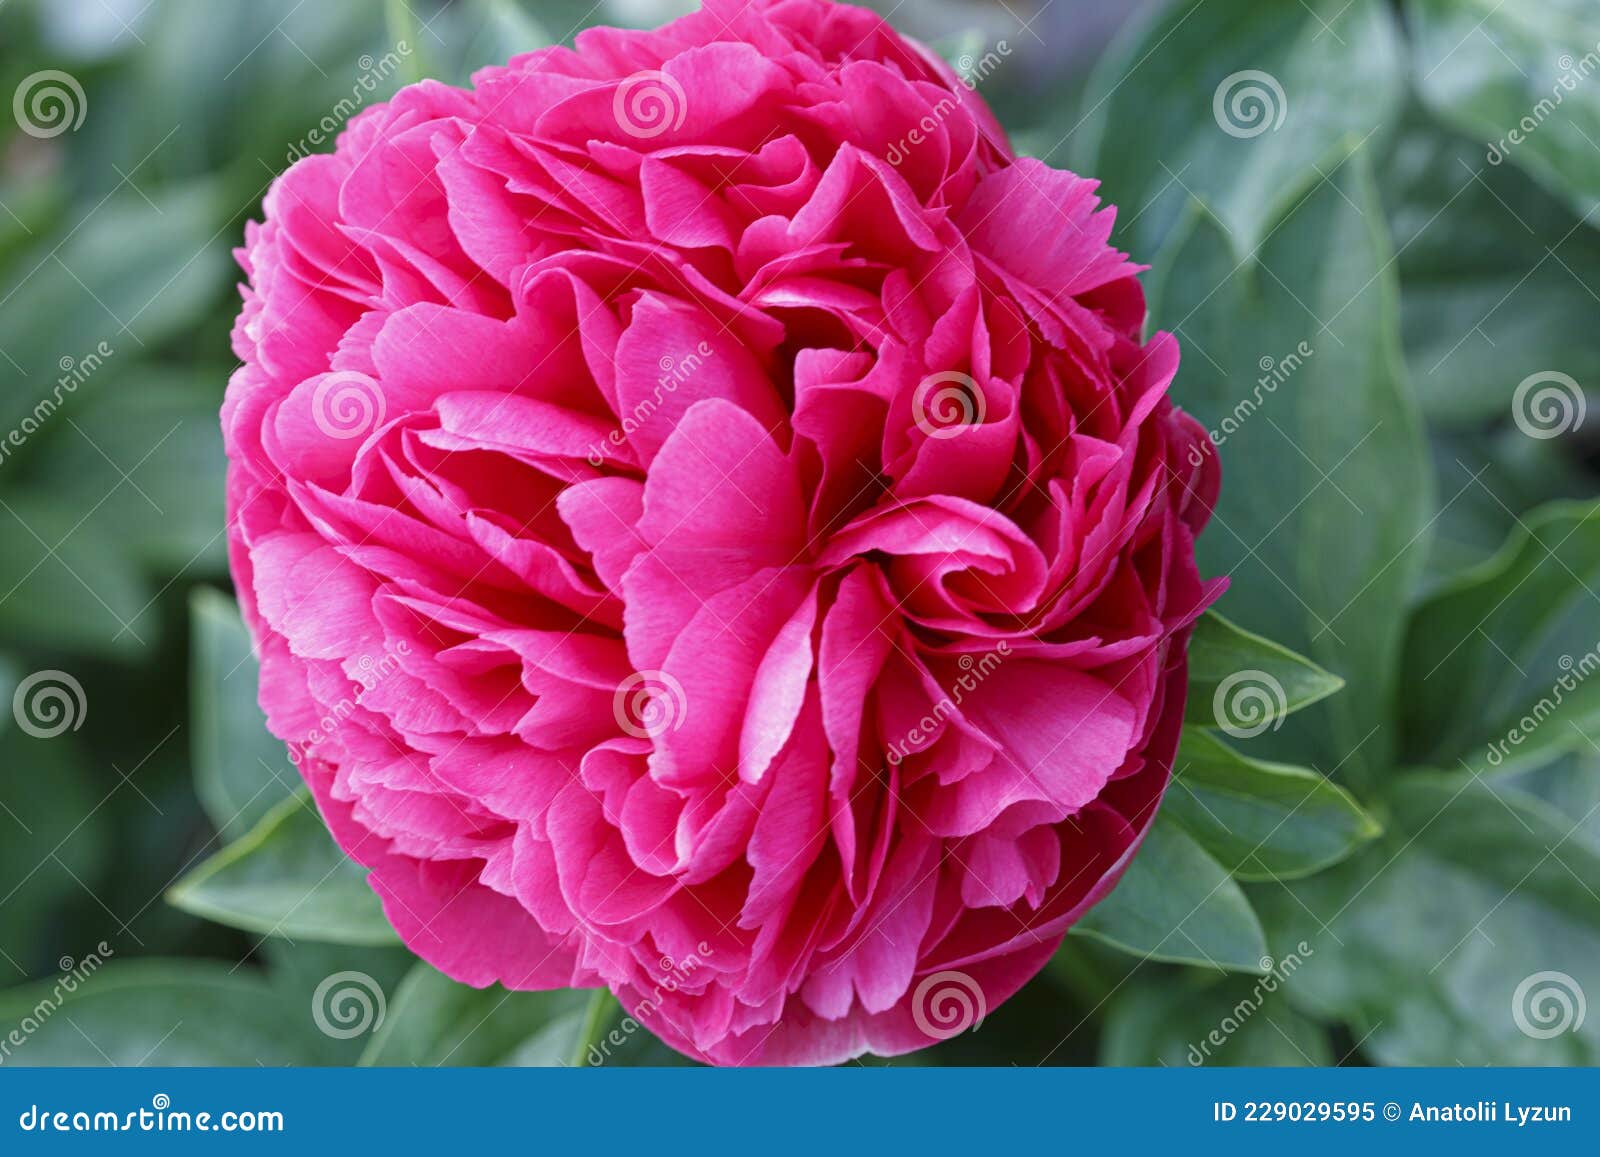 beautiful mary jo legare  pink baroque flower peony lactiflora in summer garden, close-up